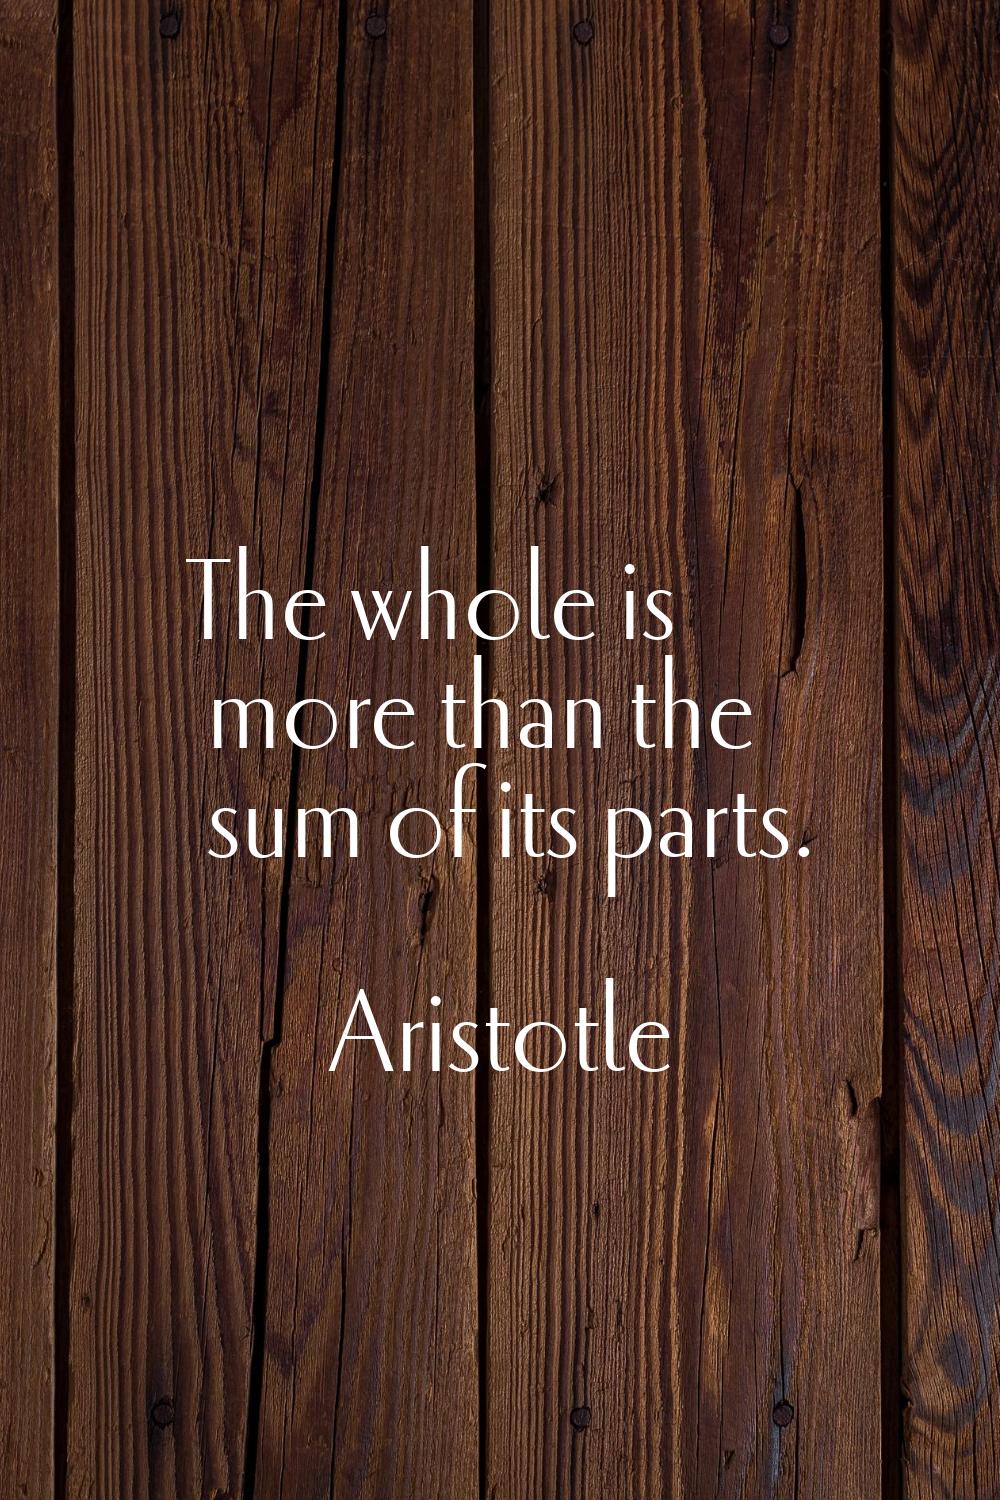 The whole is more than the sum of its parts.